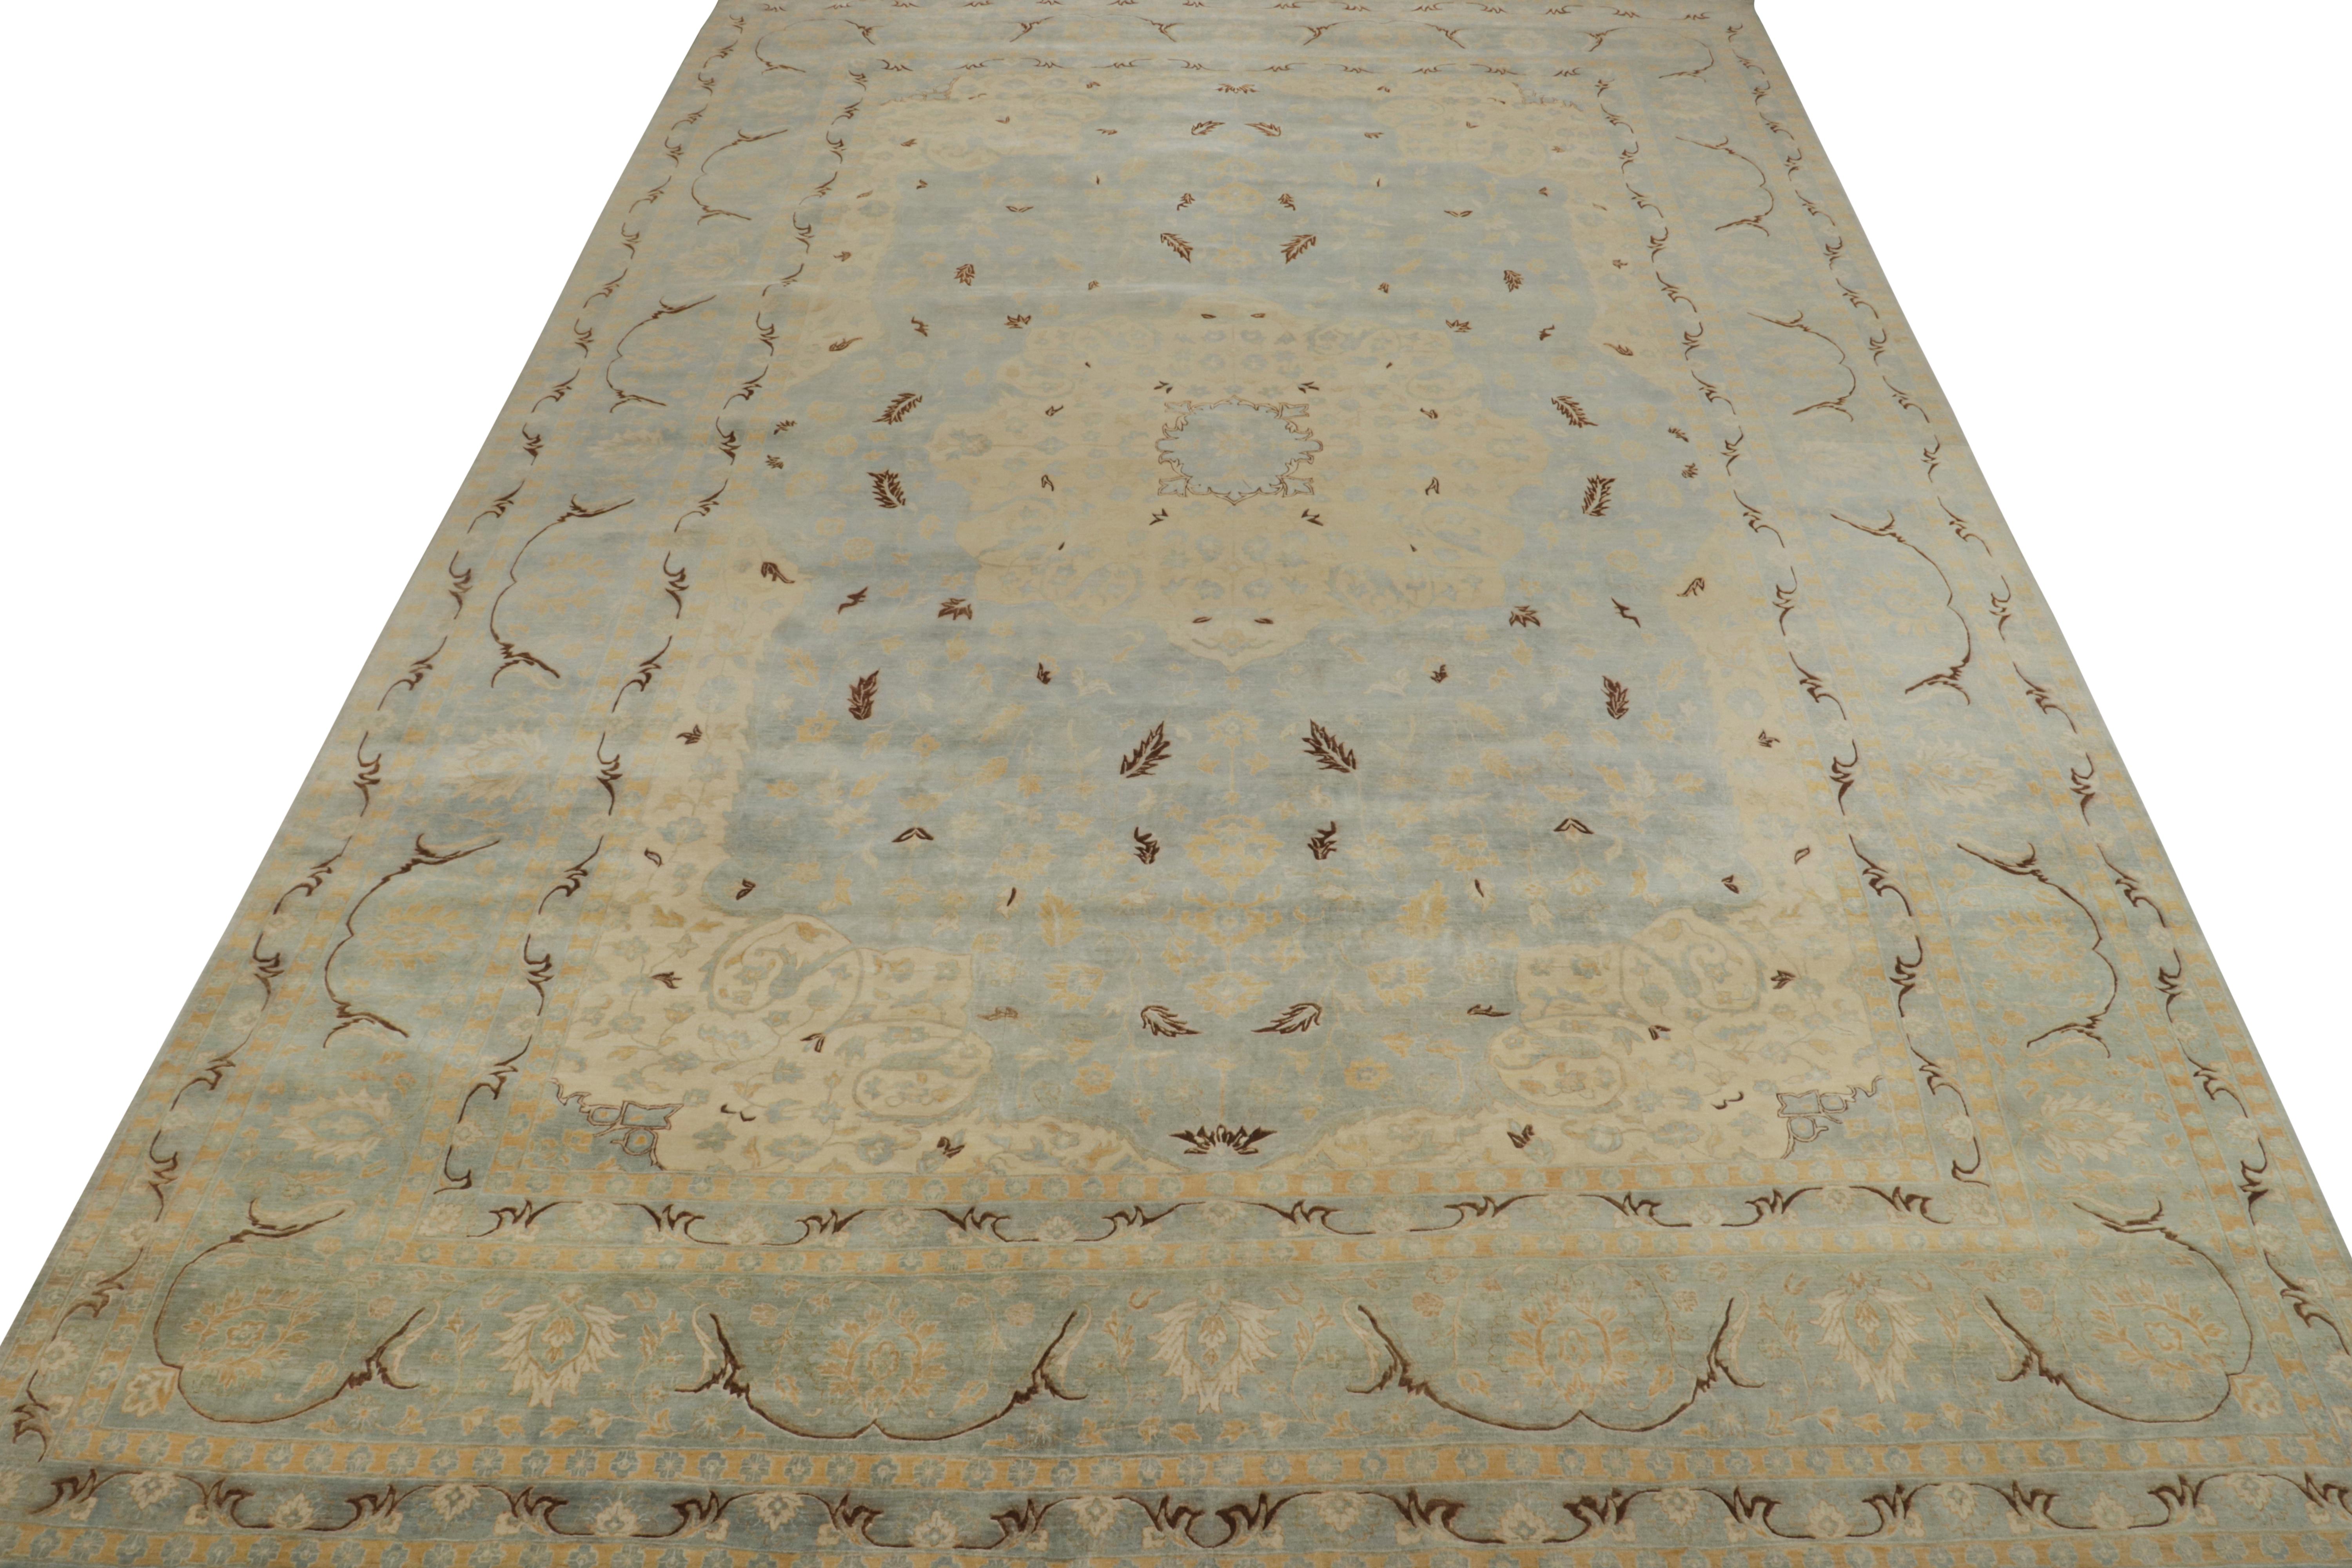 This 12x18 hand-knotted wool rug from our Modern Classics collection enjoys an inventive reimagining of antique Tabriz Persian rugs. 

The drawing depicts the celebrated Herati pattern, recaptured in the most alluring play of blue, beige, gold,